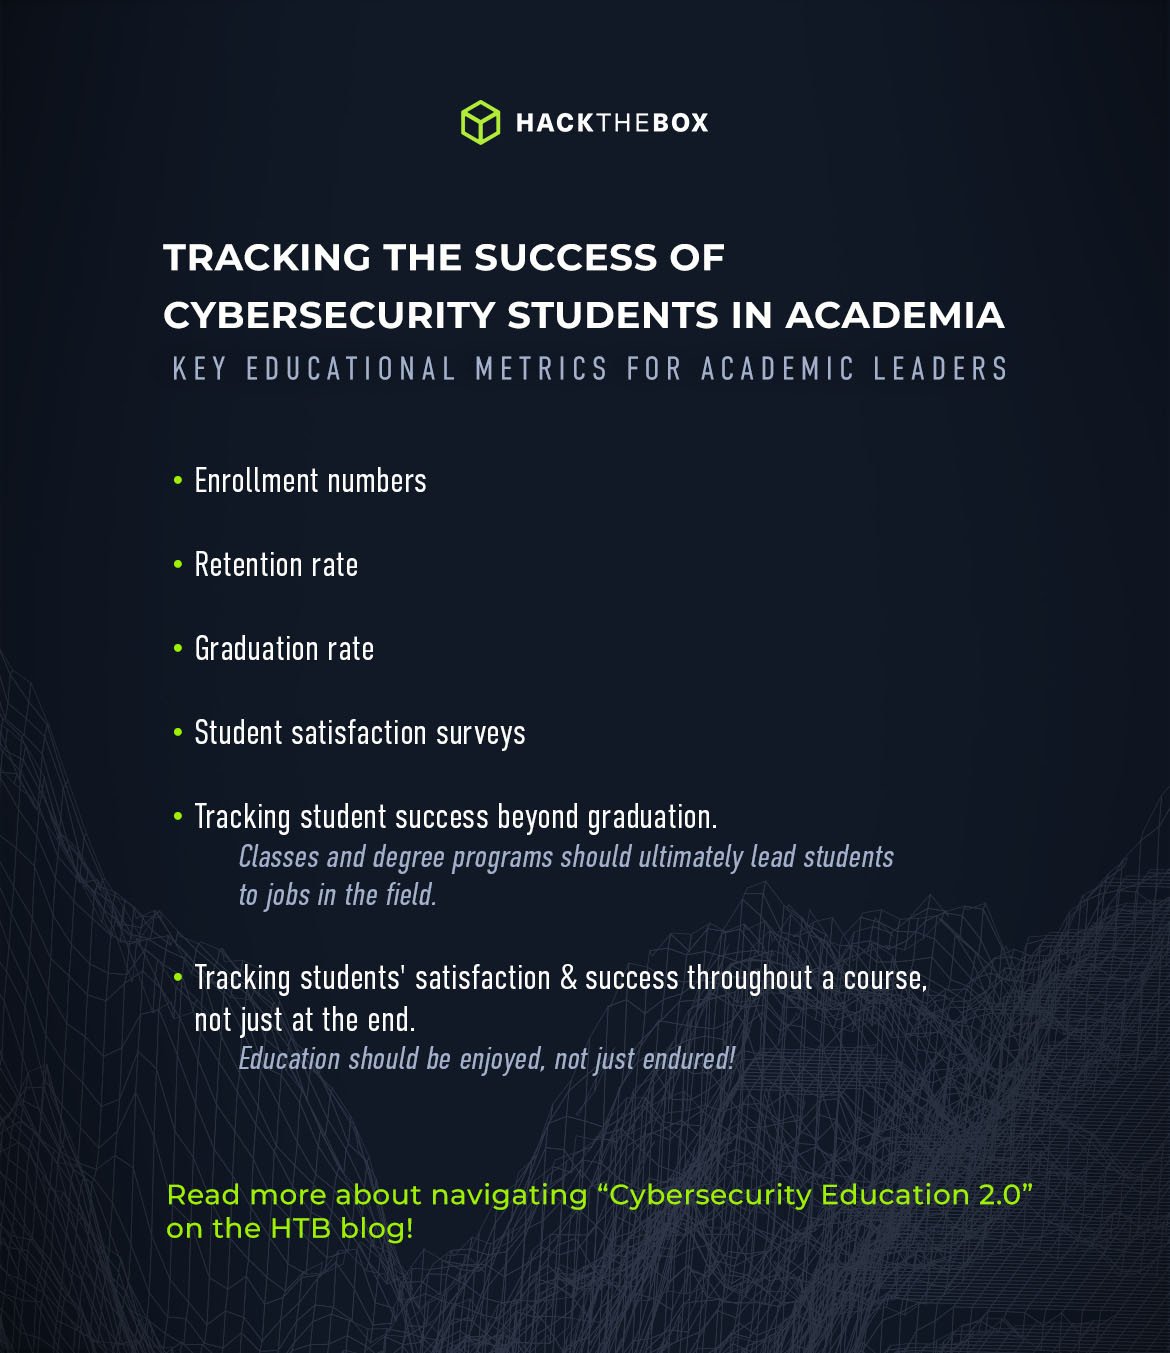 Tracking the success of cybersecurity students in academia